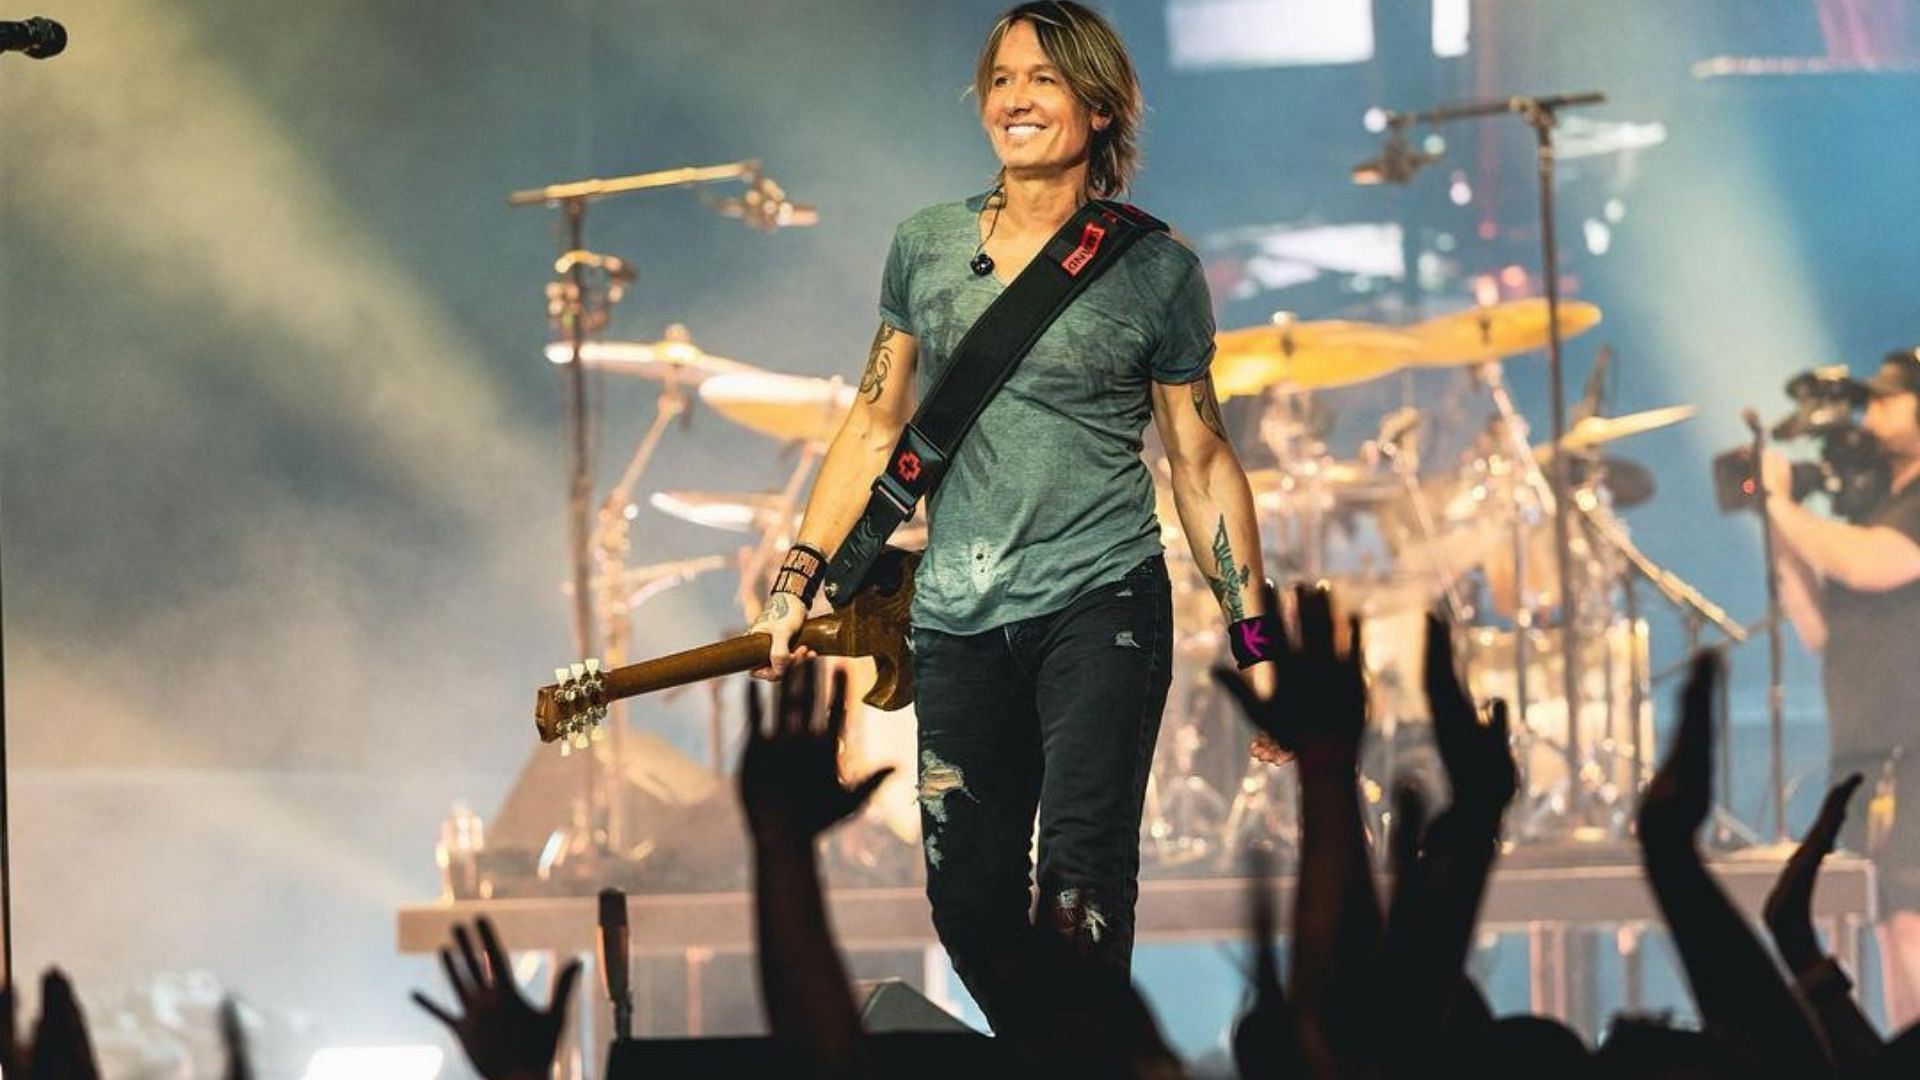 American Idol season 21 will see Keith Urban as guest mentor in the finale